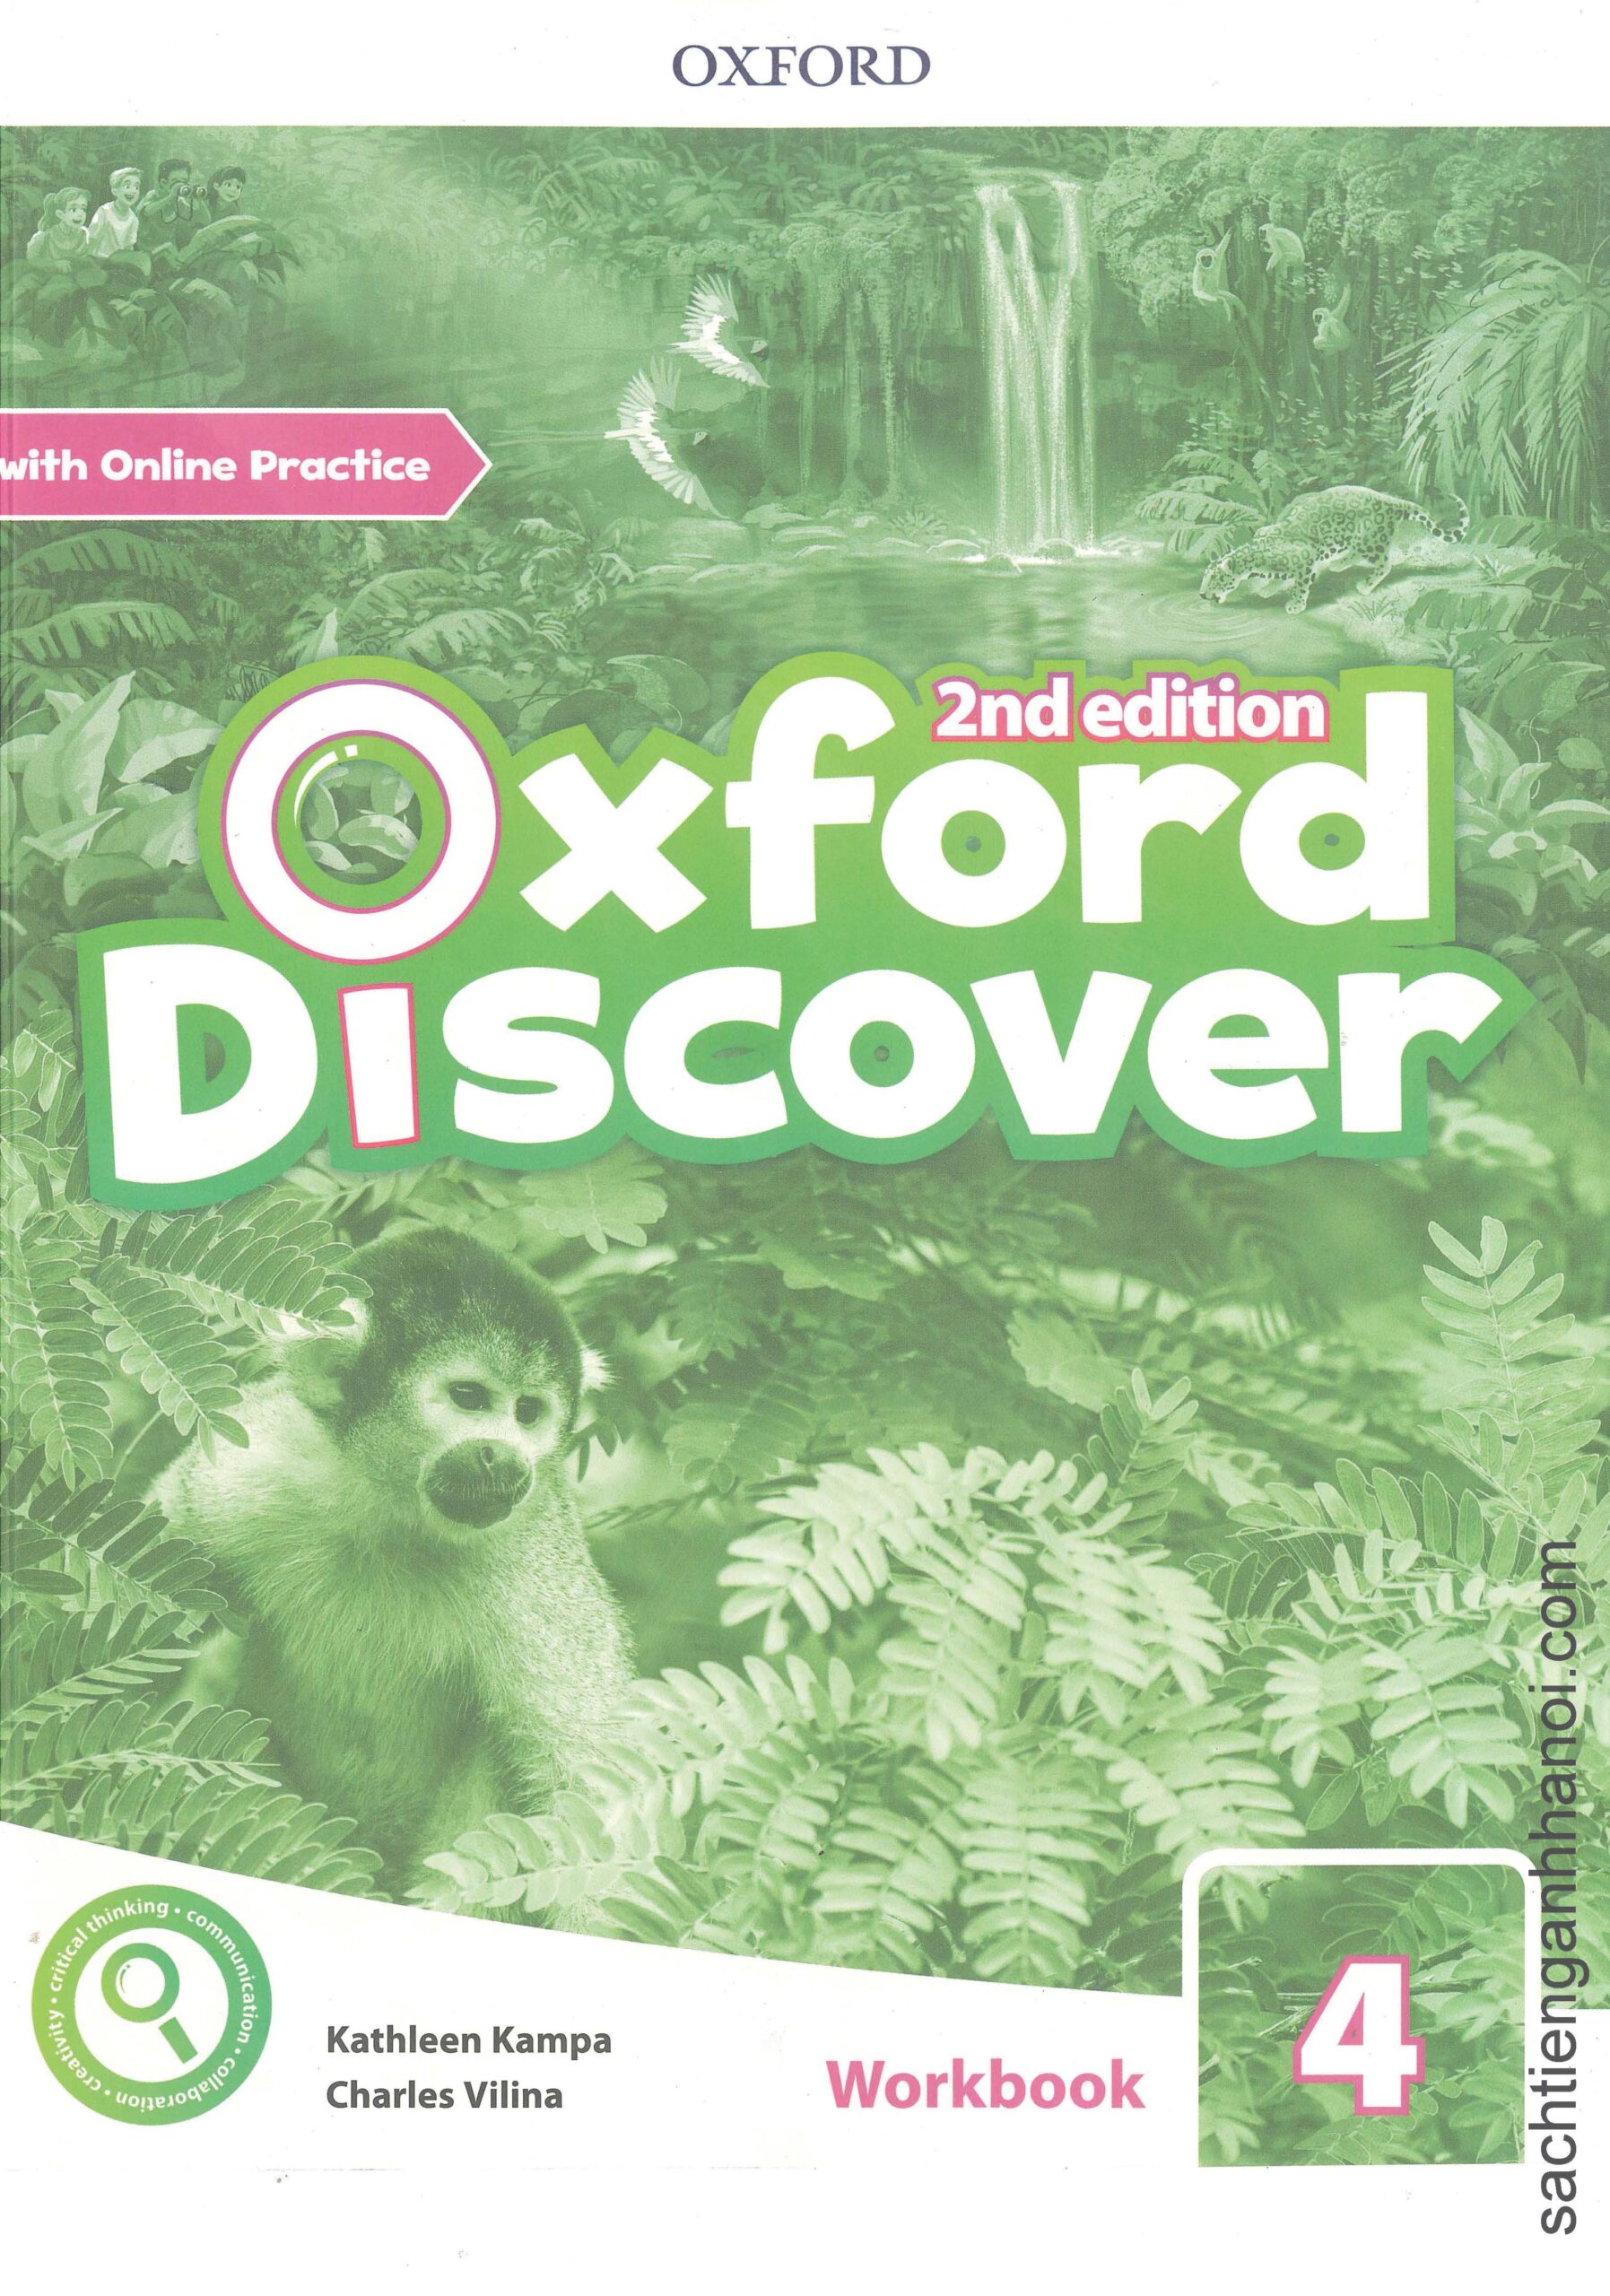 Oxford discover book. Oxford discover 4 2nd Edition. Oxford discover 2 ND. Учебник Oxford discover. Oxford Discovery 2.